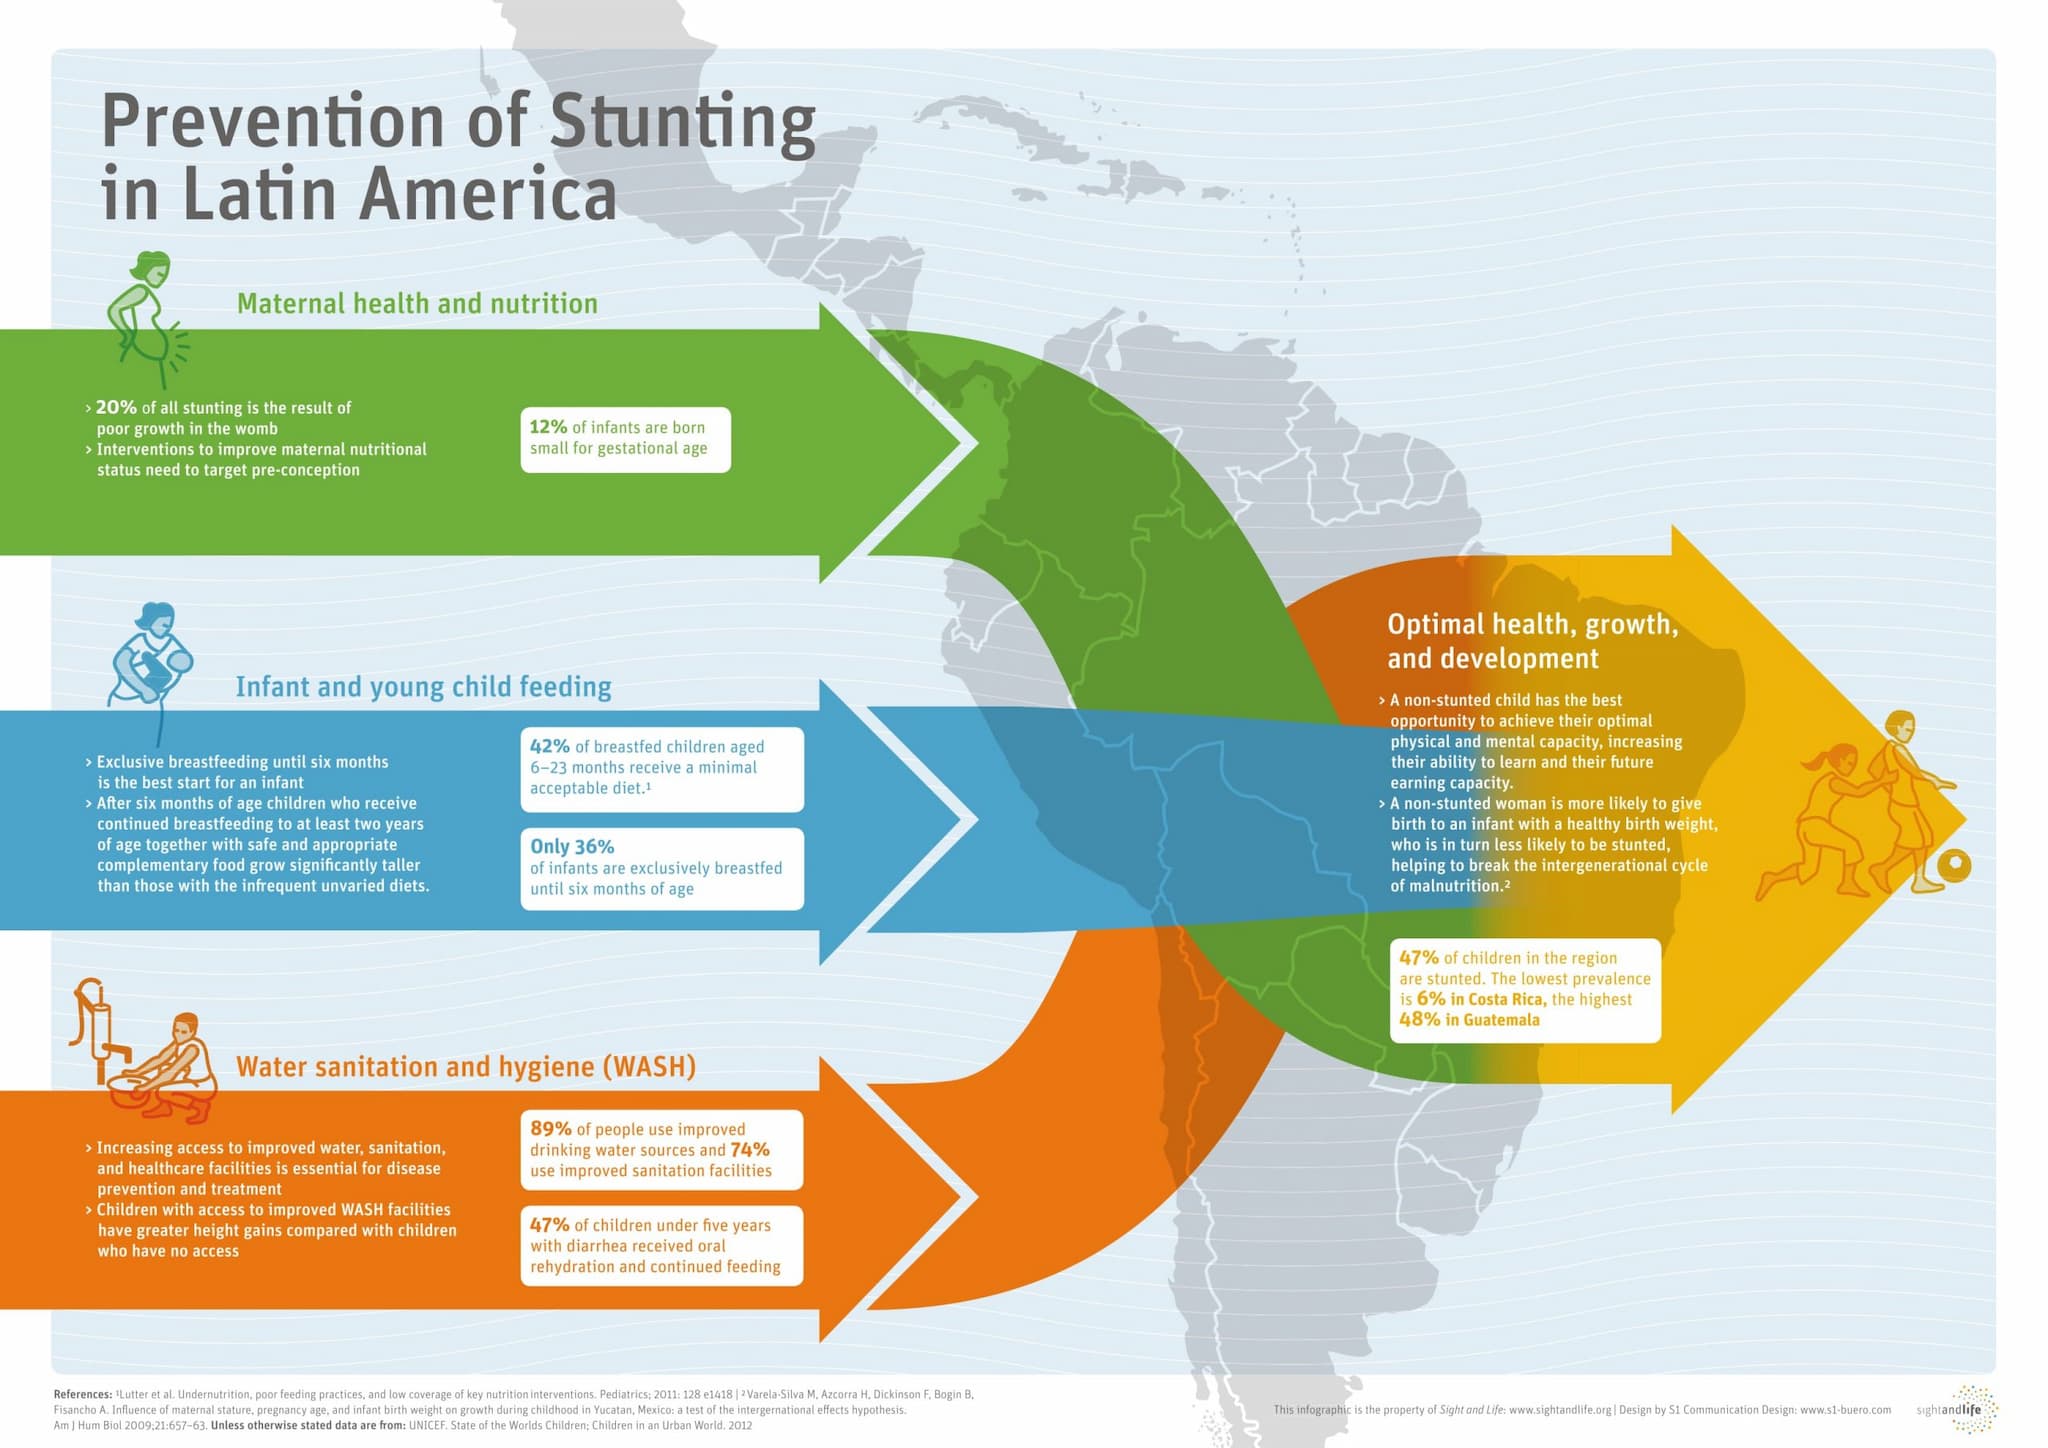 Prevention of Stunting in Latin America